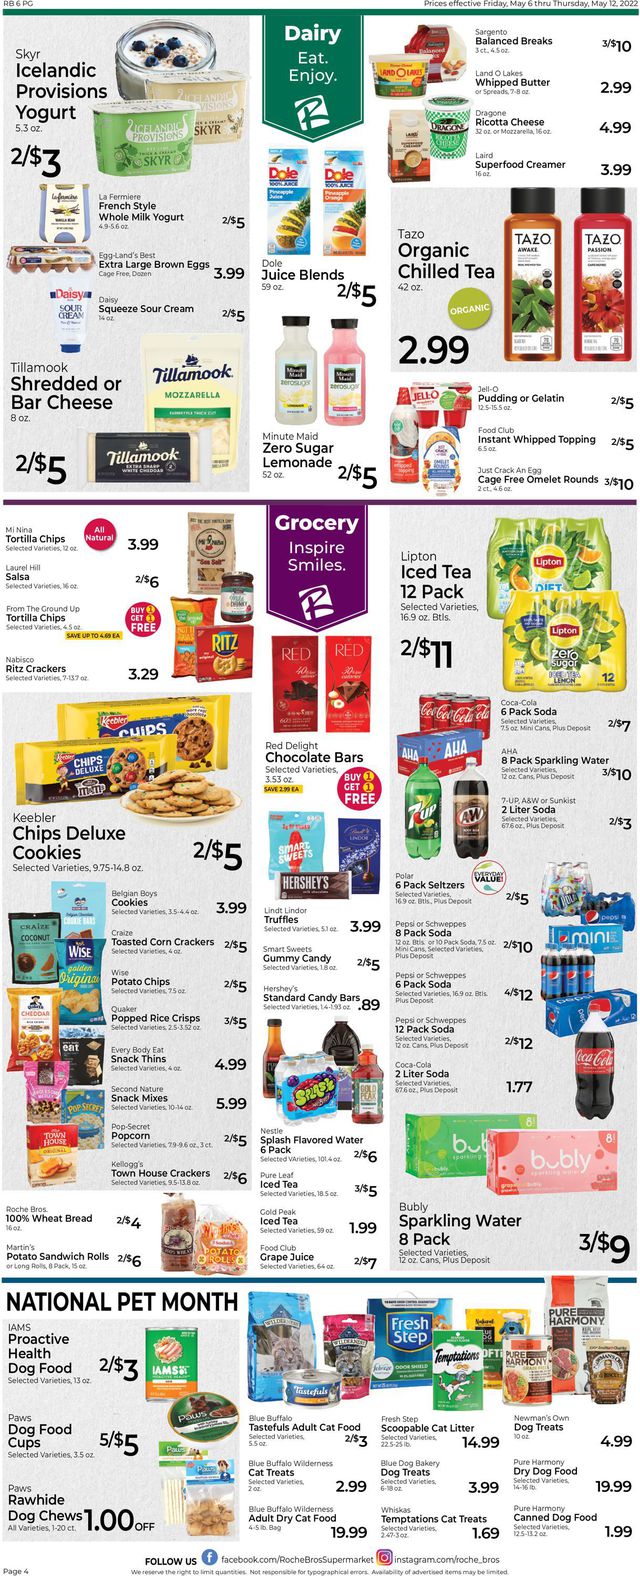 Roche Bros. Supermarkets Ad from 05/06/2022